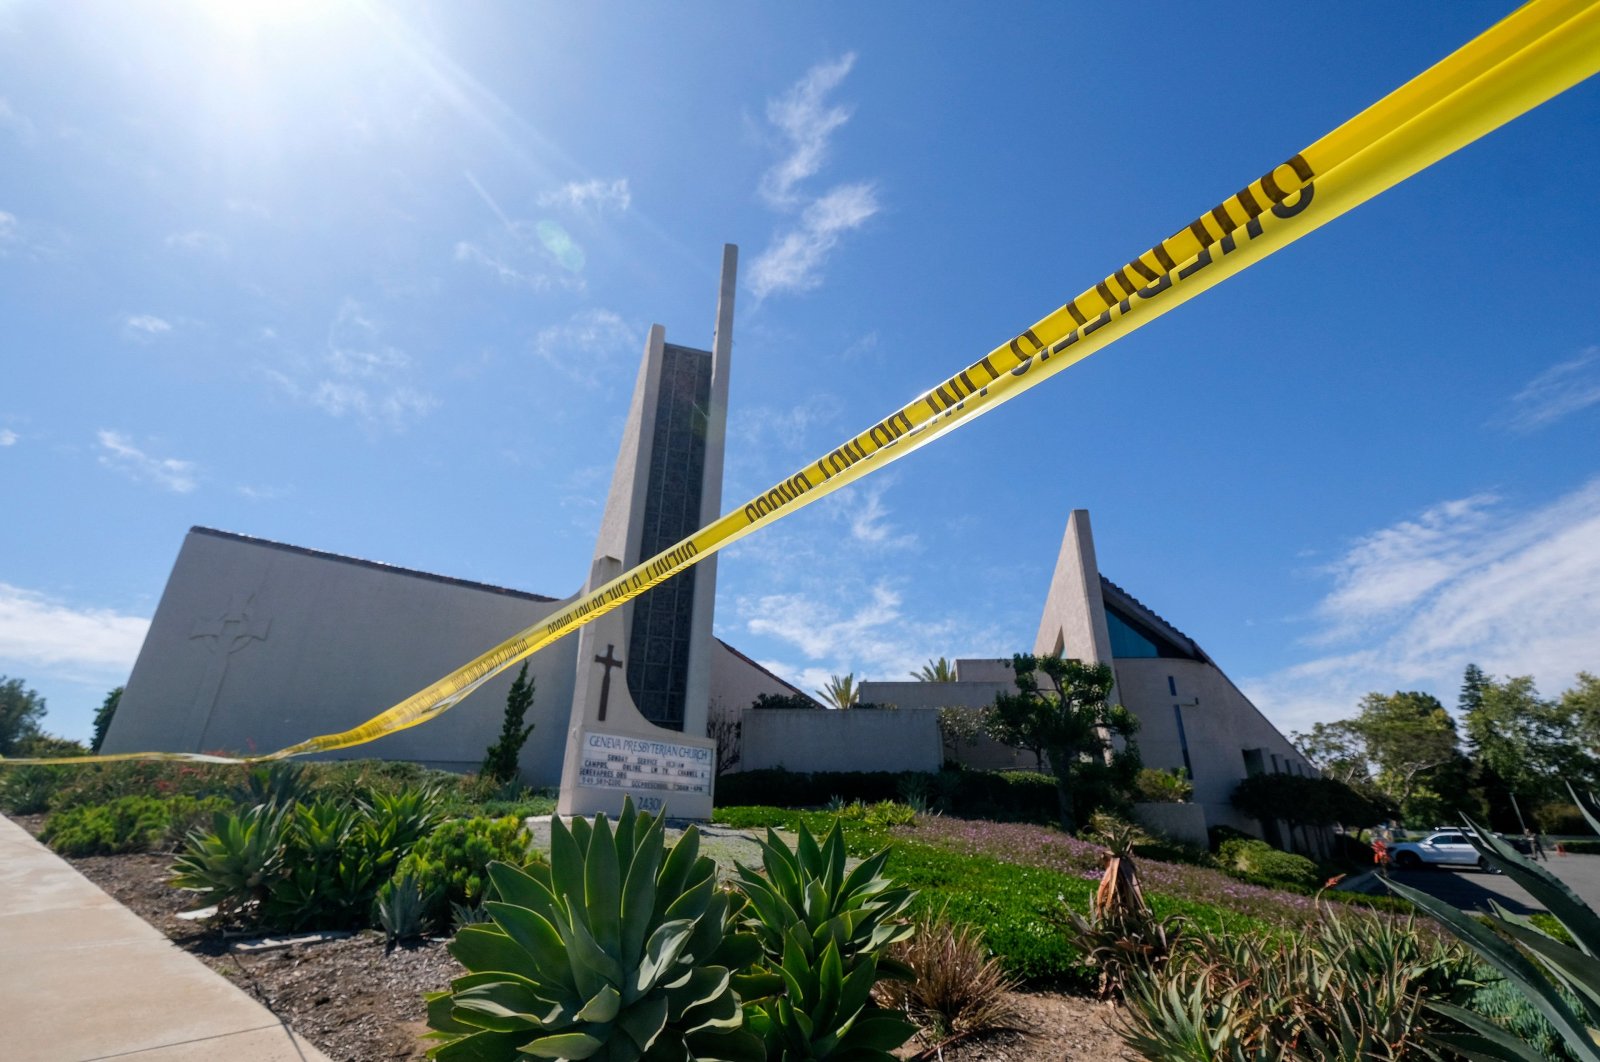 Police yellow tape is seen after a shooting inside Geneva Presbyterian Church in Laguna Woods, California, U.S., May 15, 2022. (AFP Photo)